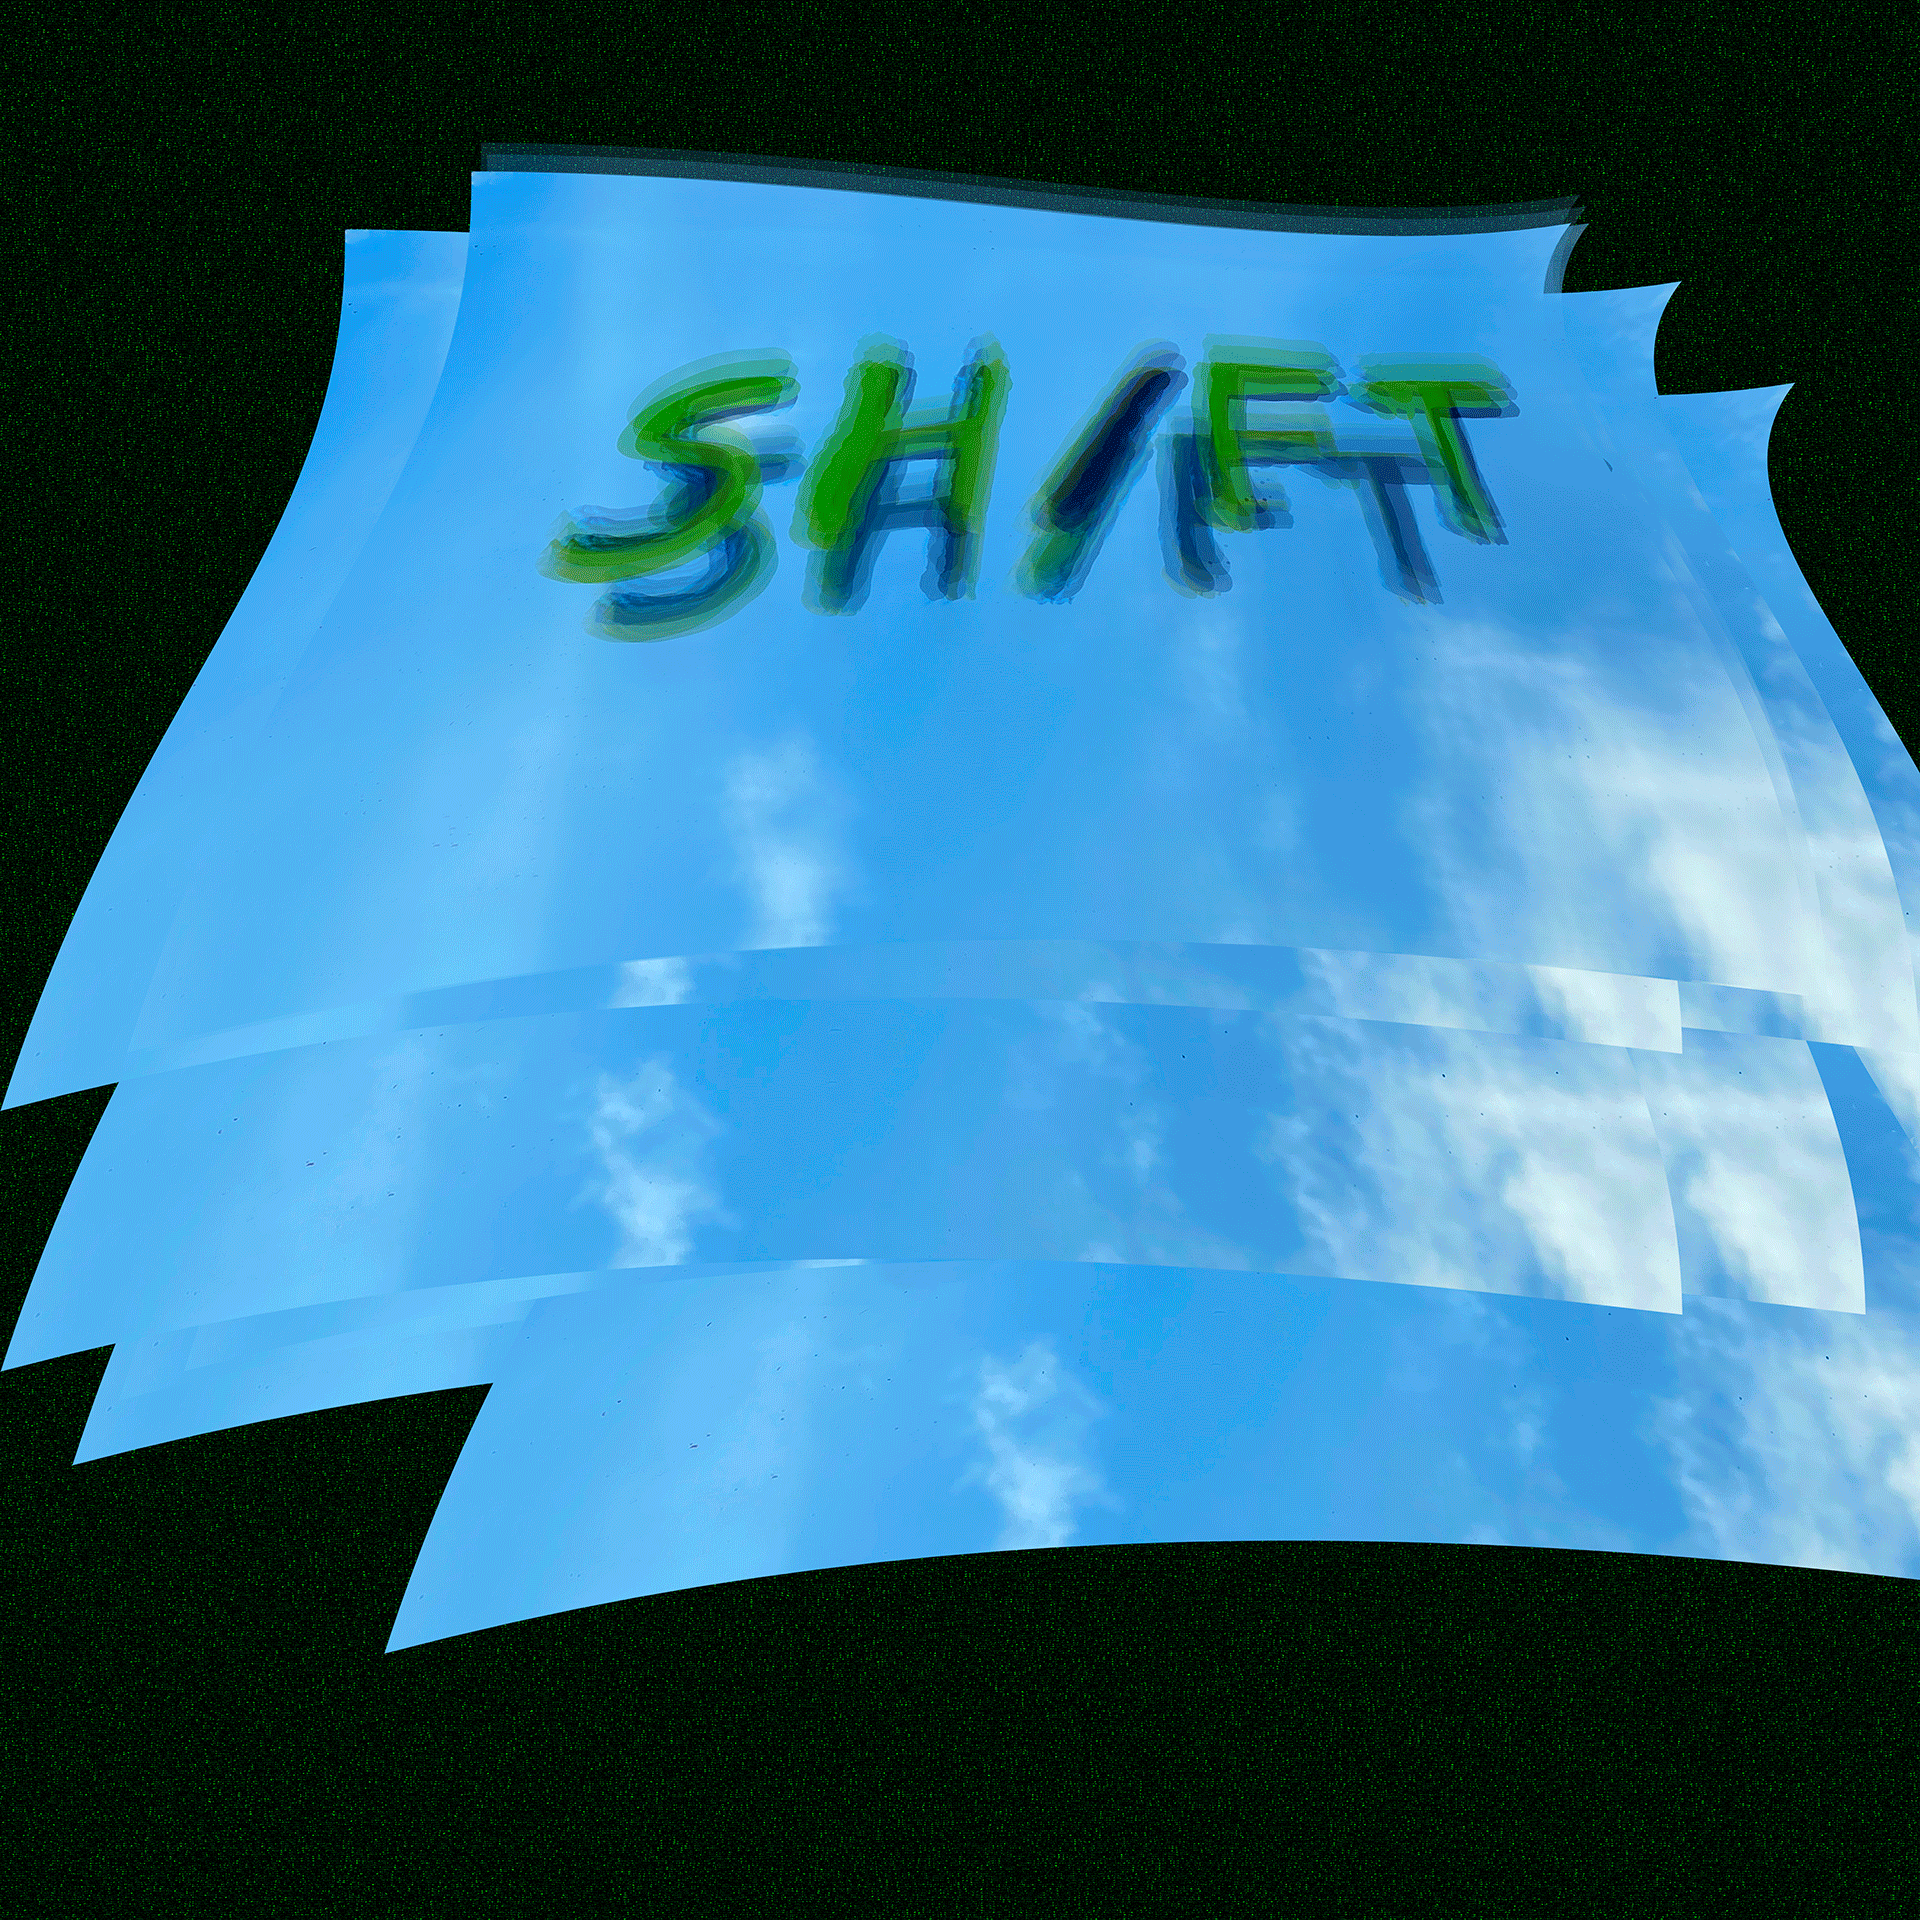 Sh / FT text on paper with rear view mirror animation